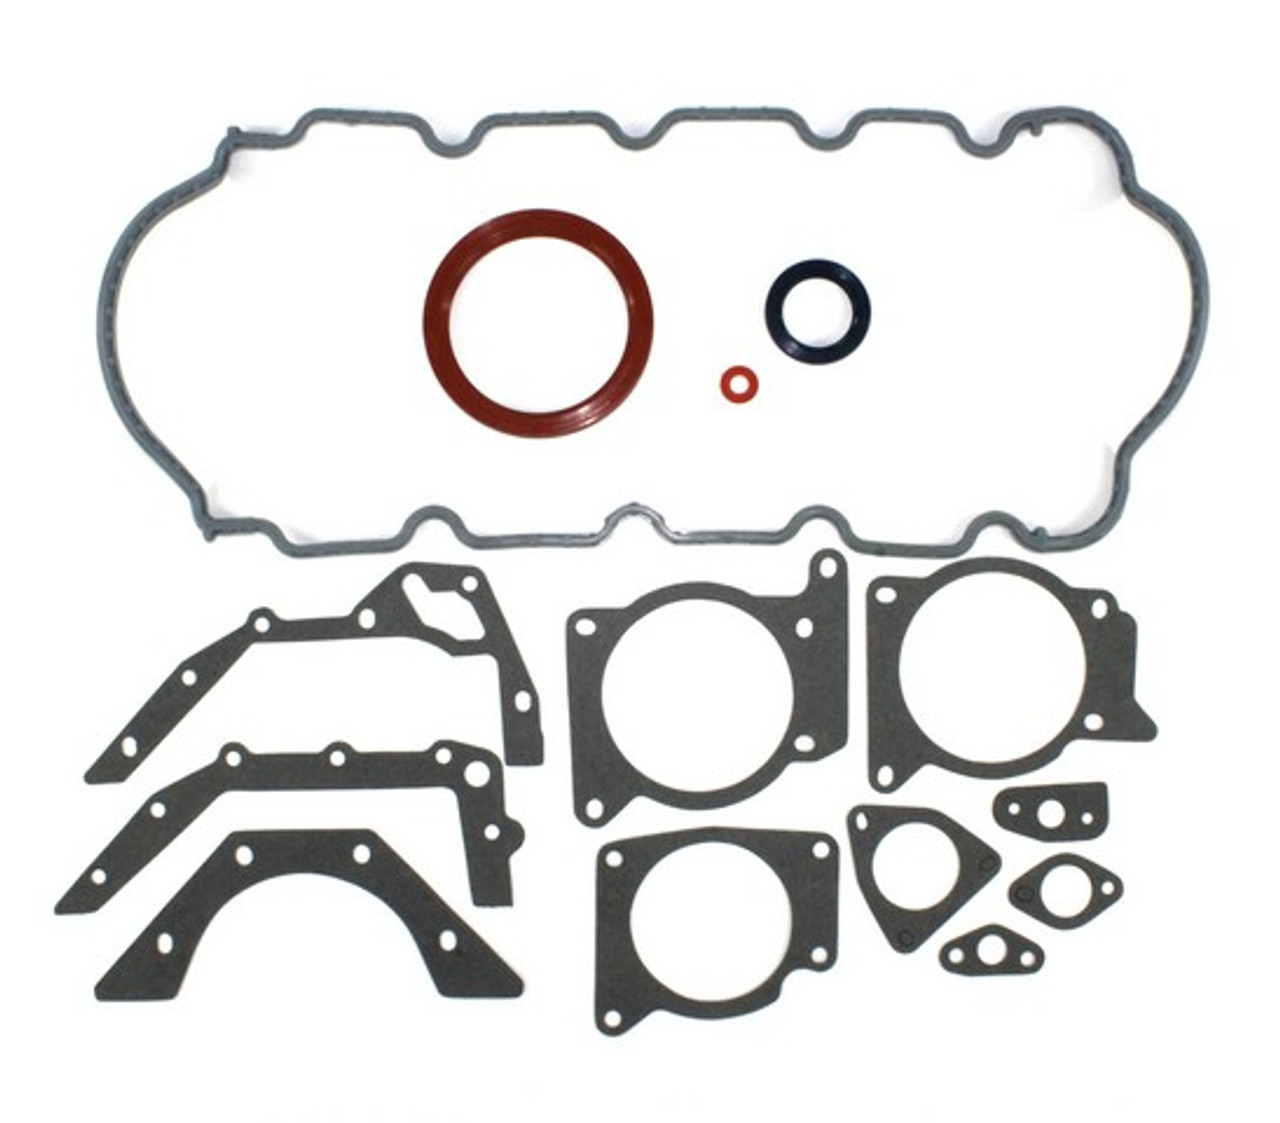 Lower Gasket Set 2.0L 2001 Ford Focus - LGS4125A.12